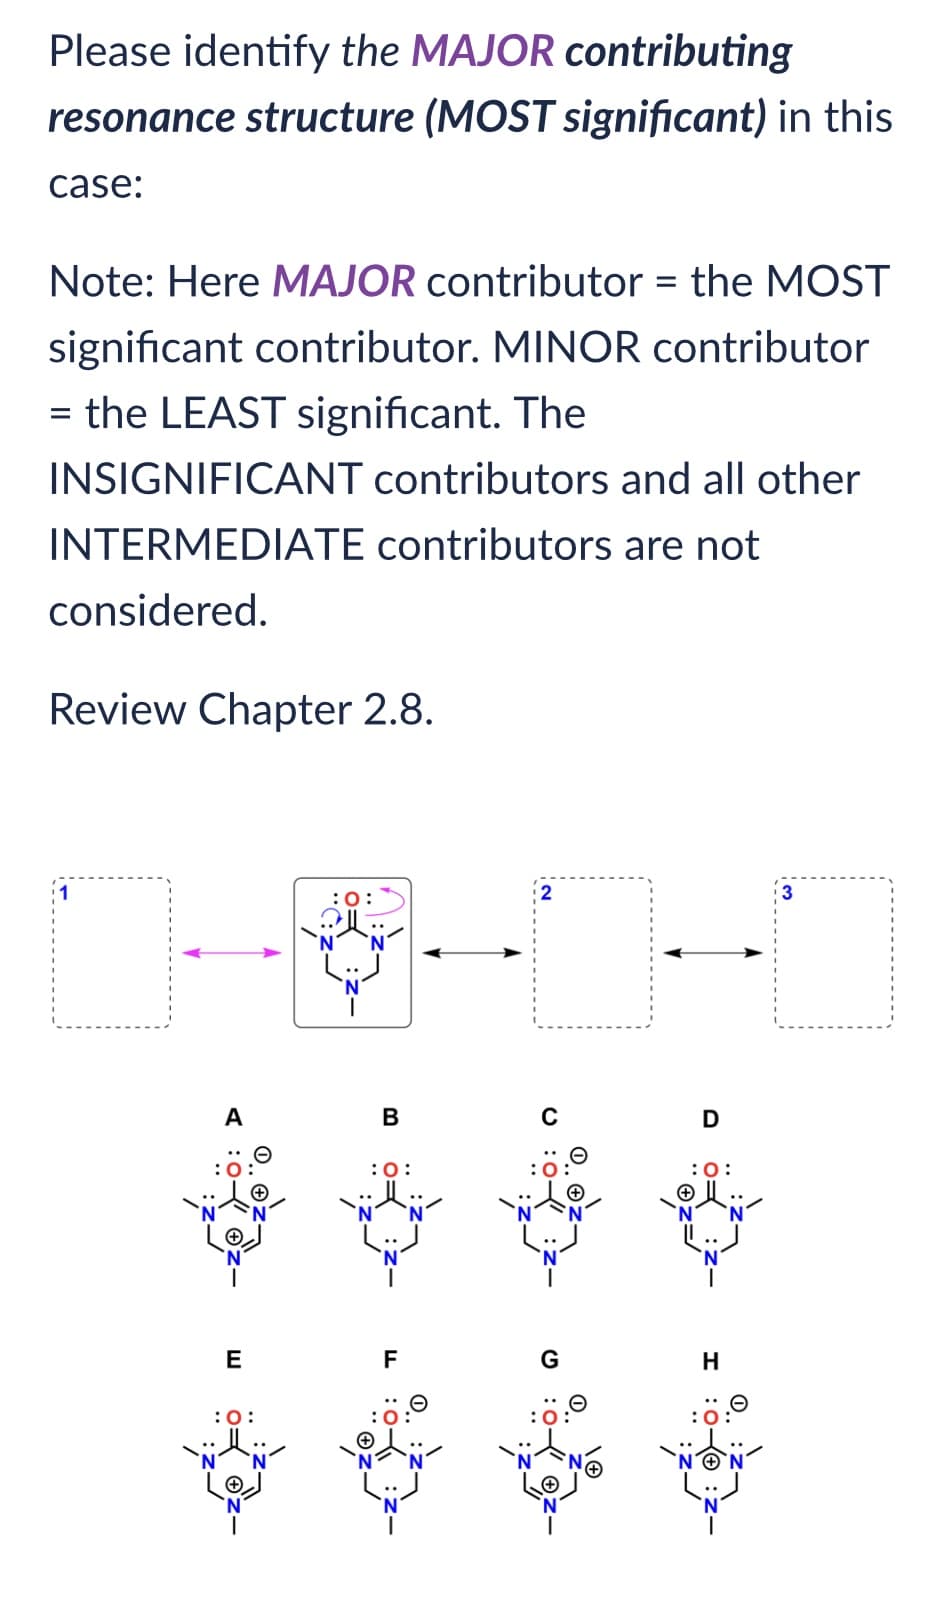 Please identify the MAJOR contributing
resonance structure (MOST significant) in this
case:
Note: Here MAJOR contributor = the MOST
significant contributor. MINOR contributor
= the LEAST significant. The
INSIGNIFICANT contributors and all other
INTERMEDIATE contributors are not
considered.
Review Chapter 2.8.
A
E
:O:
:0:
B
:0:
F
G
D
:0:
H